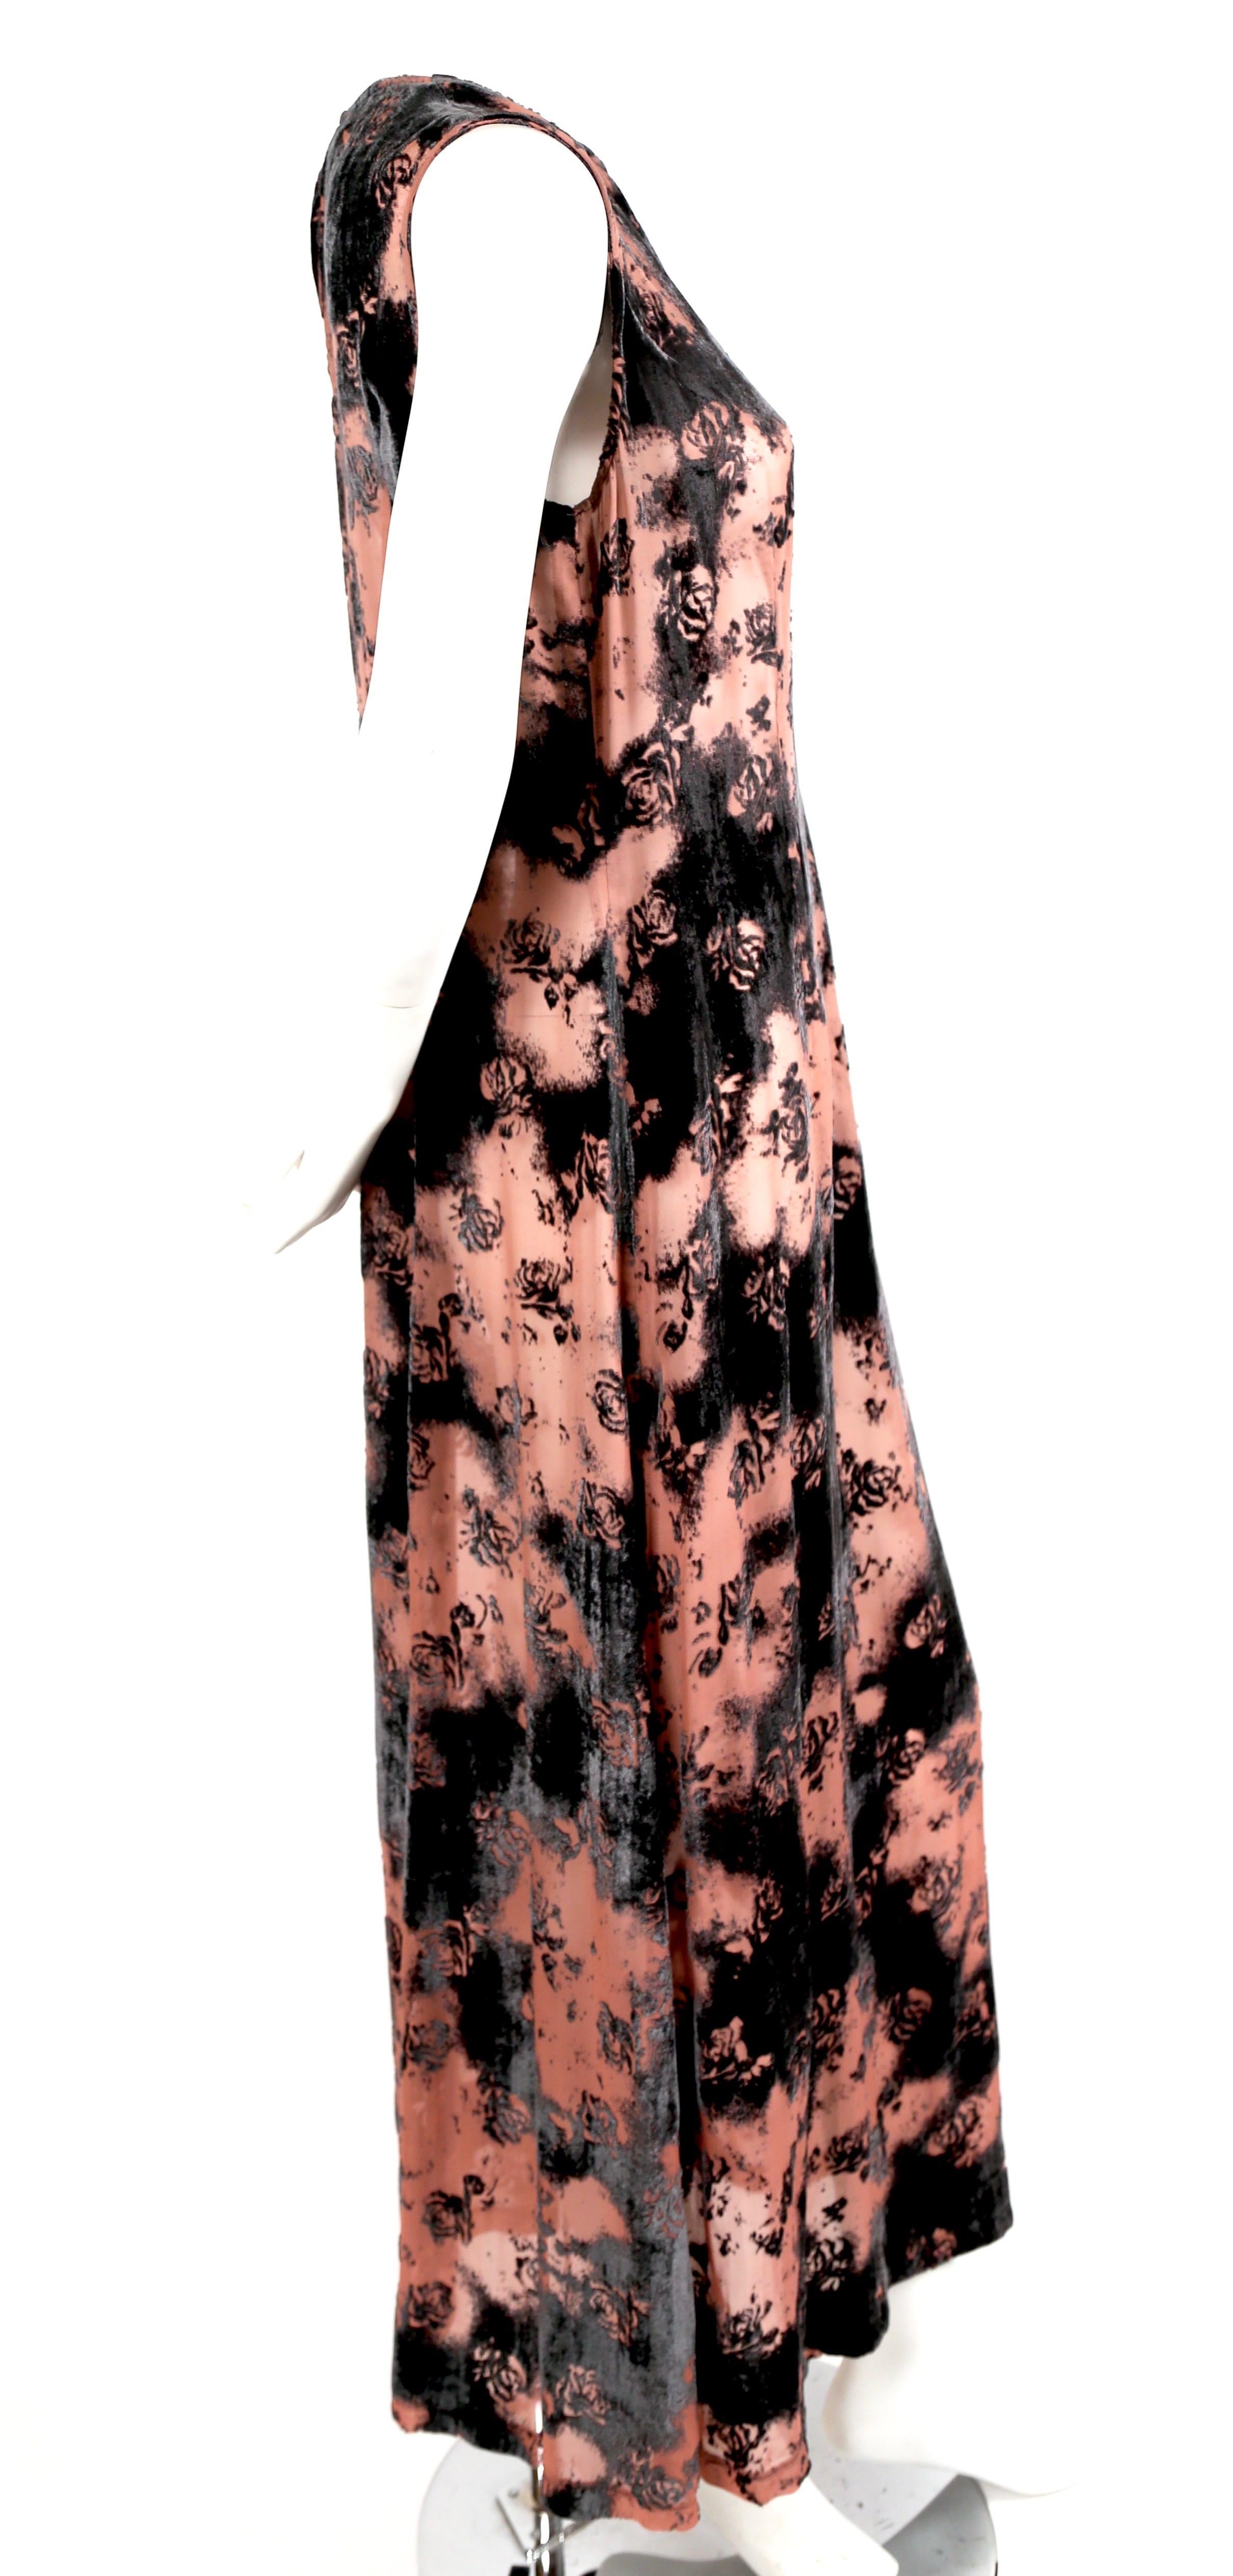 Soft pink and black semi-sheer, velvet maxi dress designed by Ann Demeulemeester dating to the 1994. Belgian size 38 which best fits a US 4 or 6. Approximate measurements: bust 36